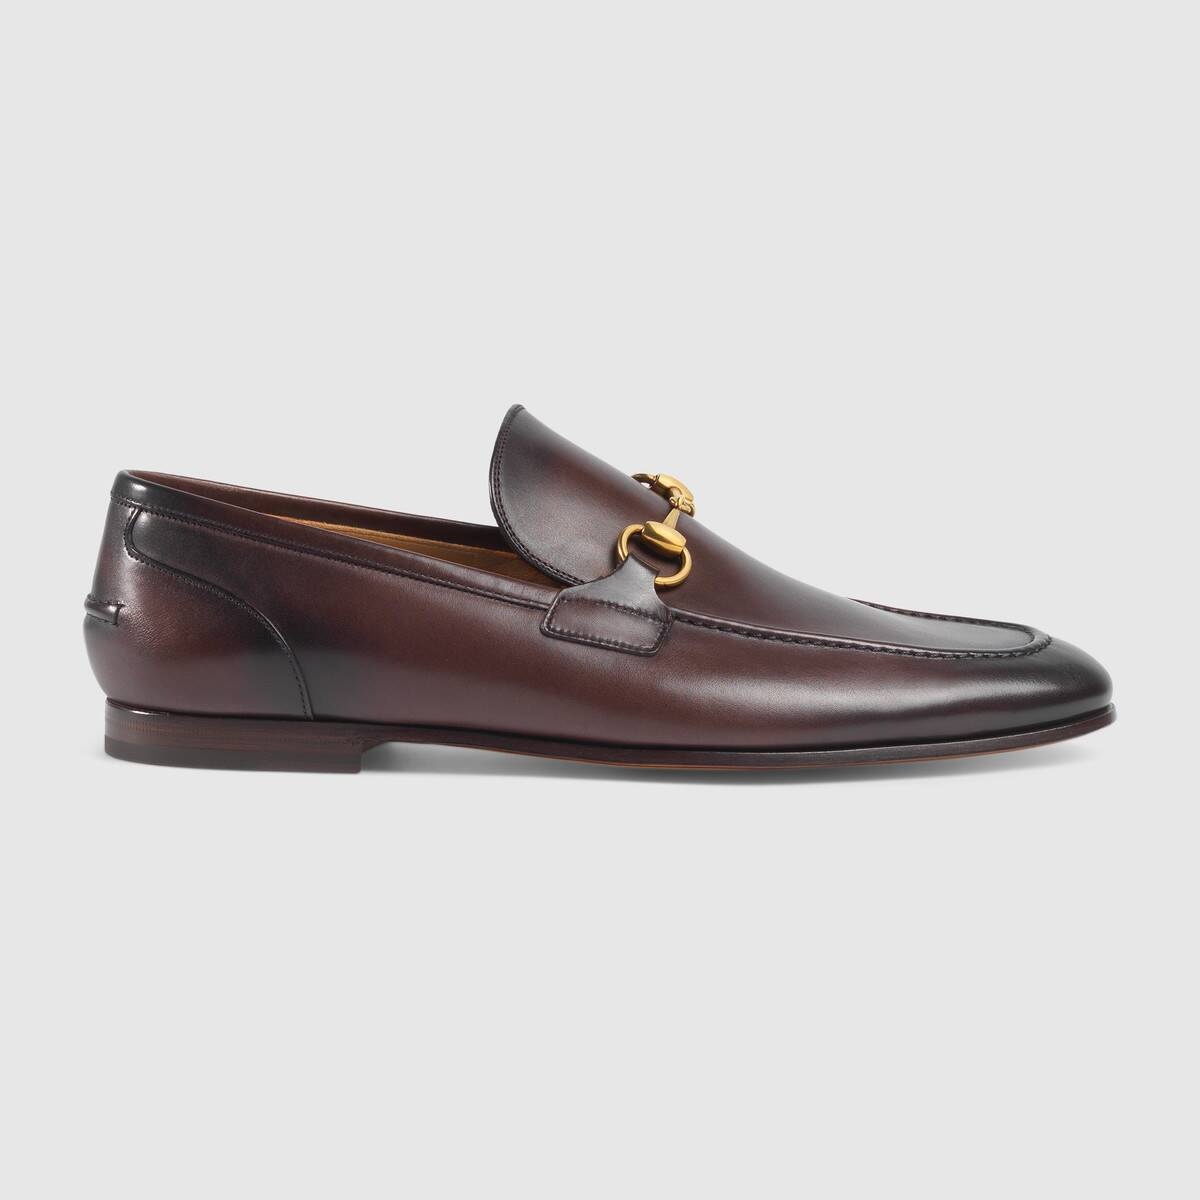 Gucci Jordaan leather loafer - 1